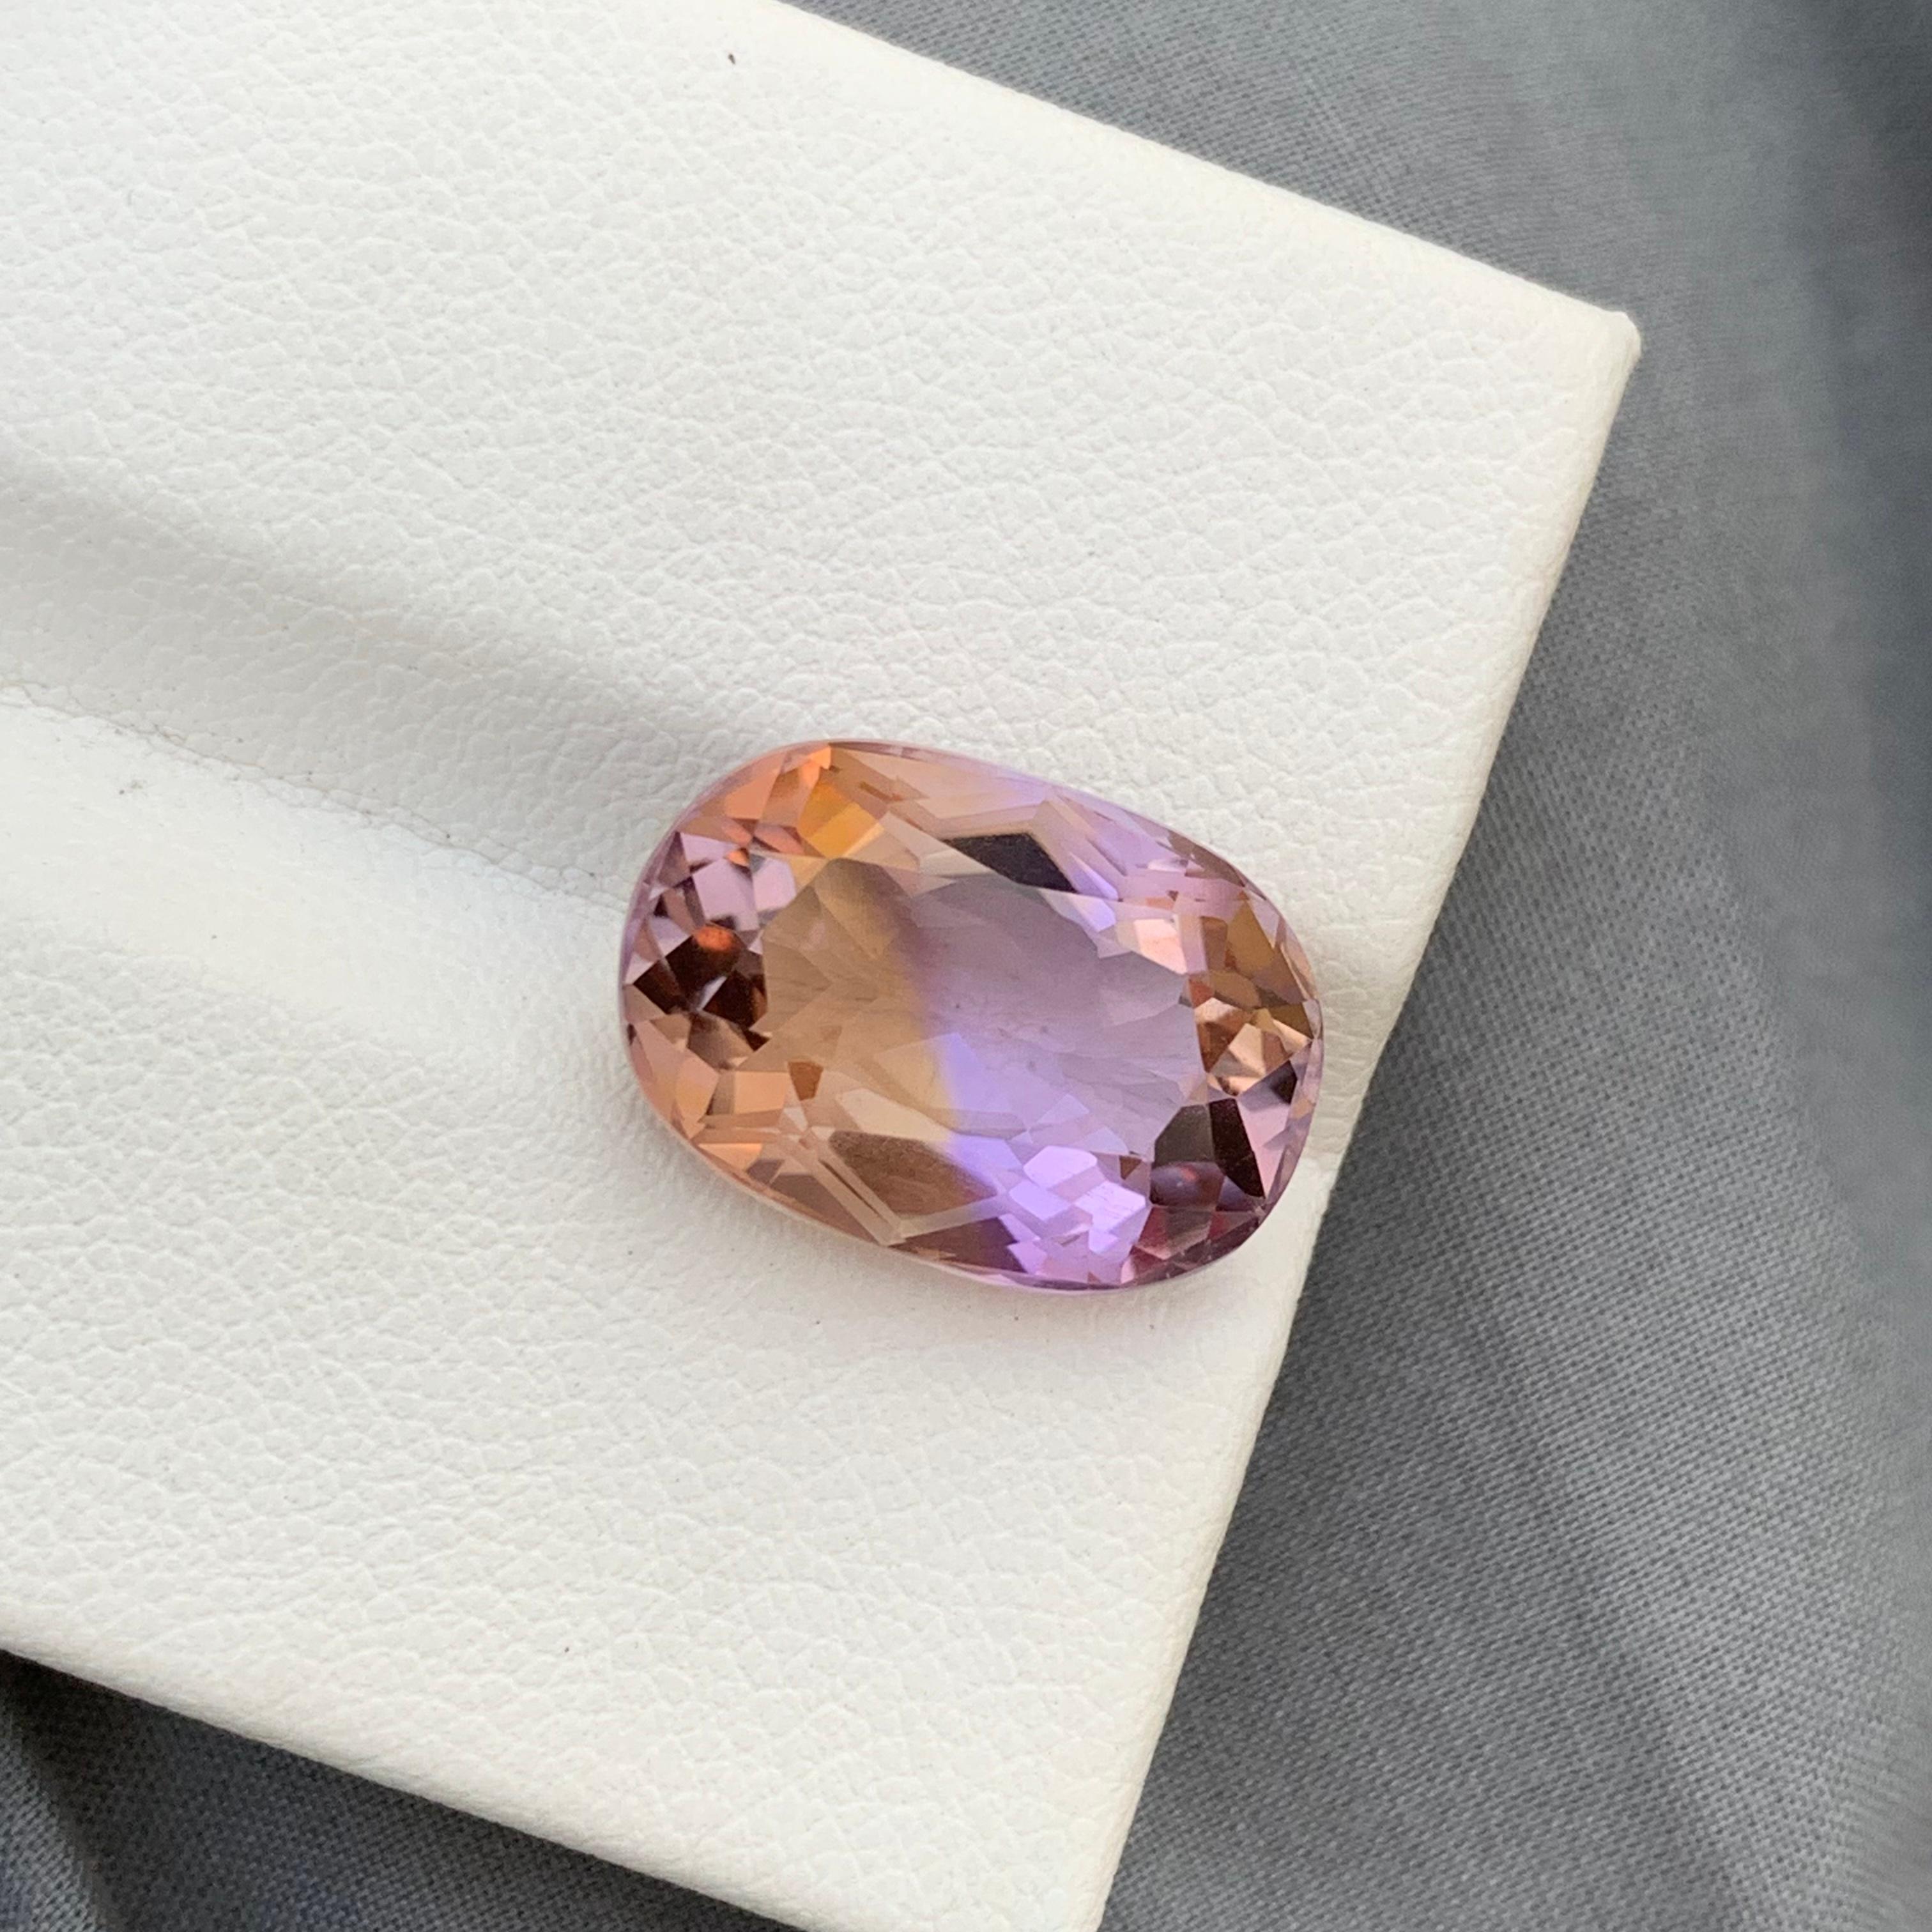 Arts and Crafts Gorgeous 9.95 Carat Oval Shape Loose Ametrine Ring Gem From Brazi Mine For Sale